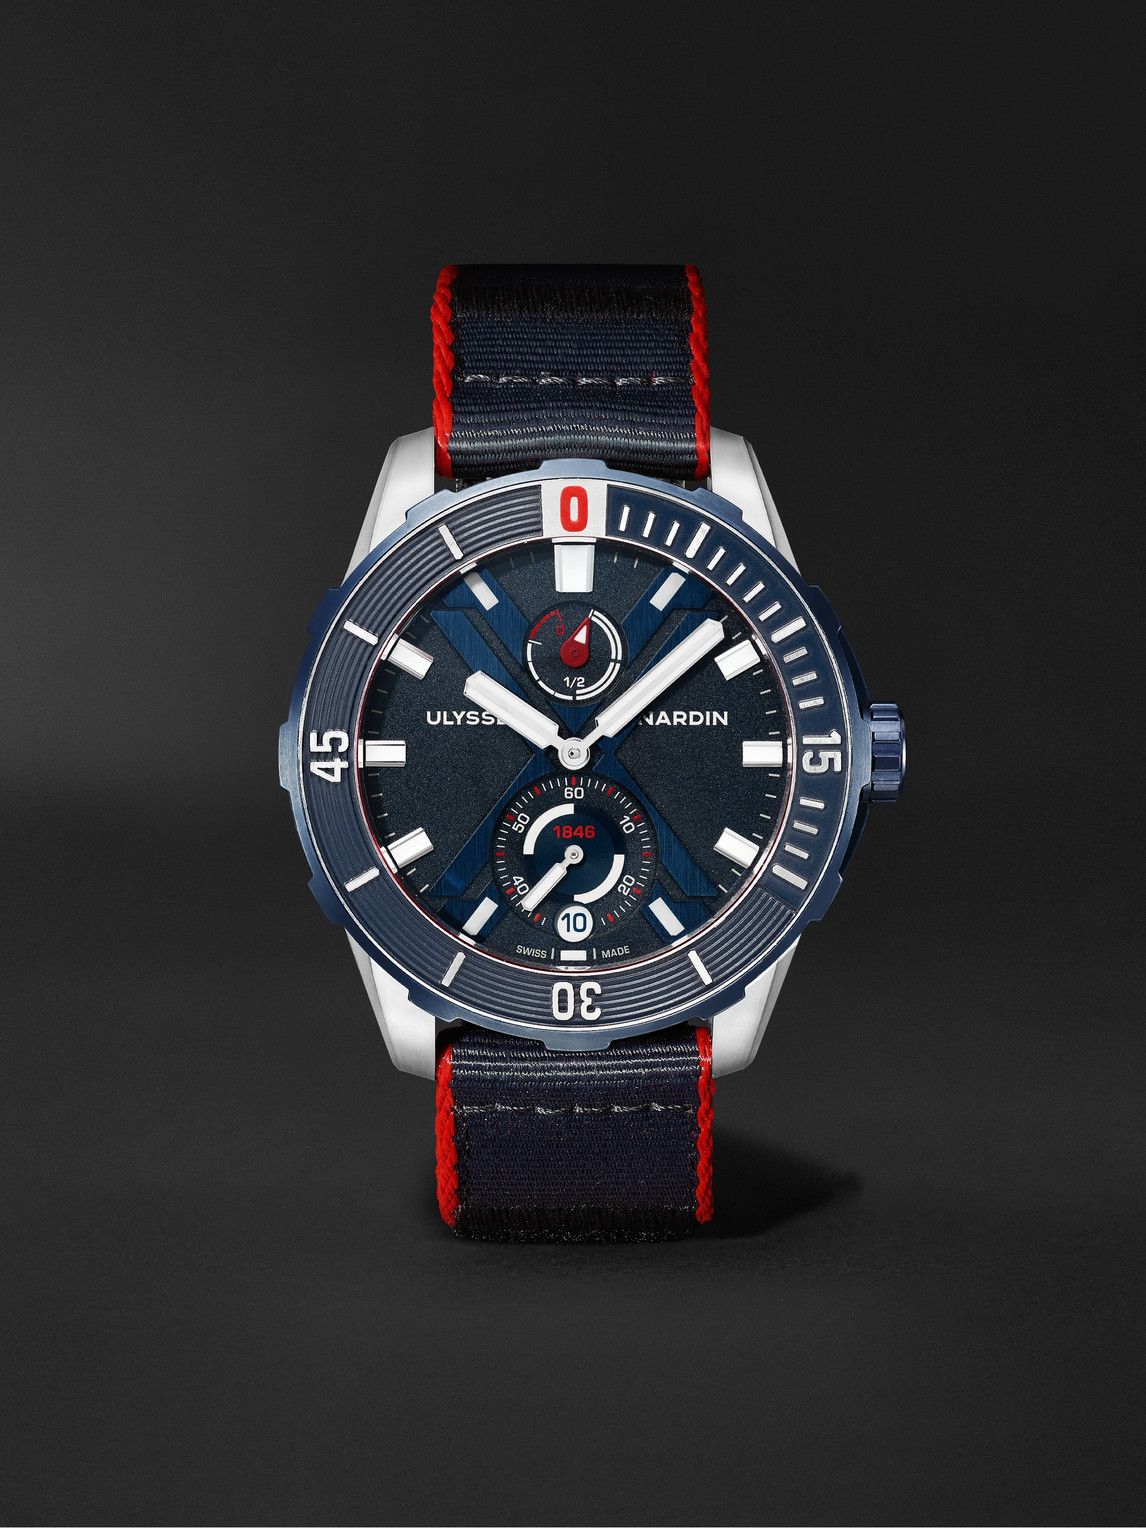 Ulysse Nardin Diver X Nemo Point Limited Edition Automatic 44mm Titanium And Webbing Watch, Ref. No. 1183-170le/93 In Blue